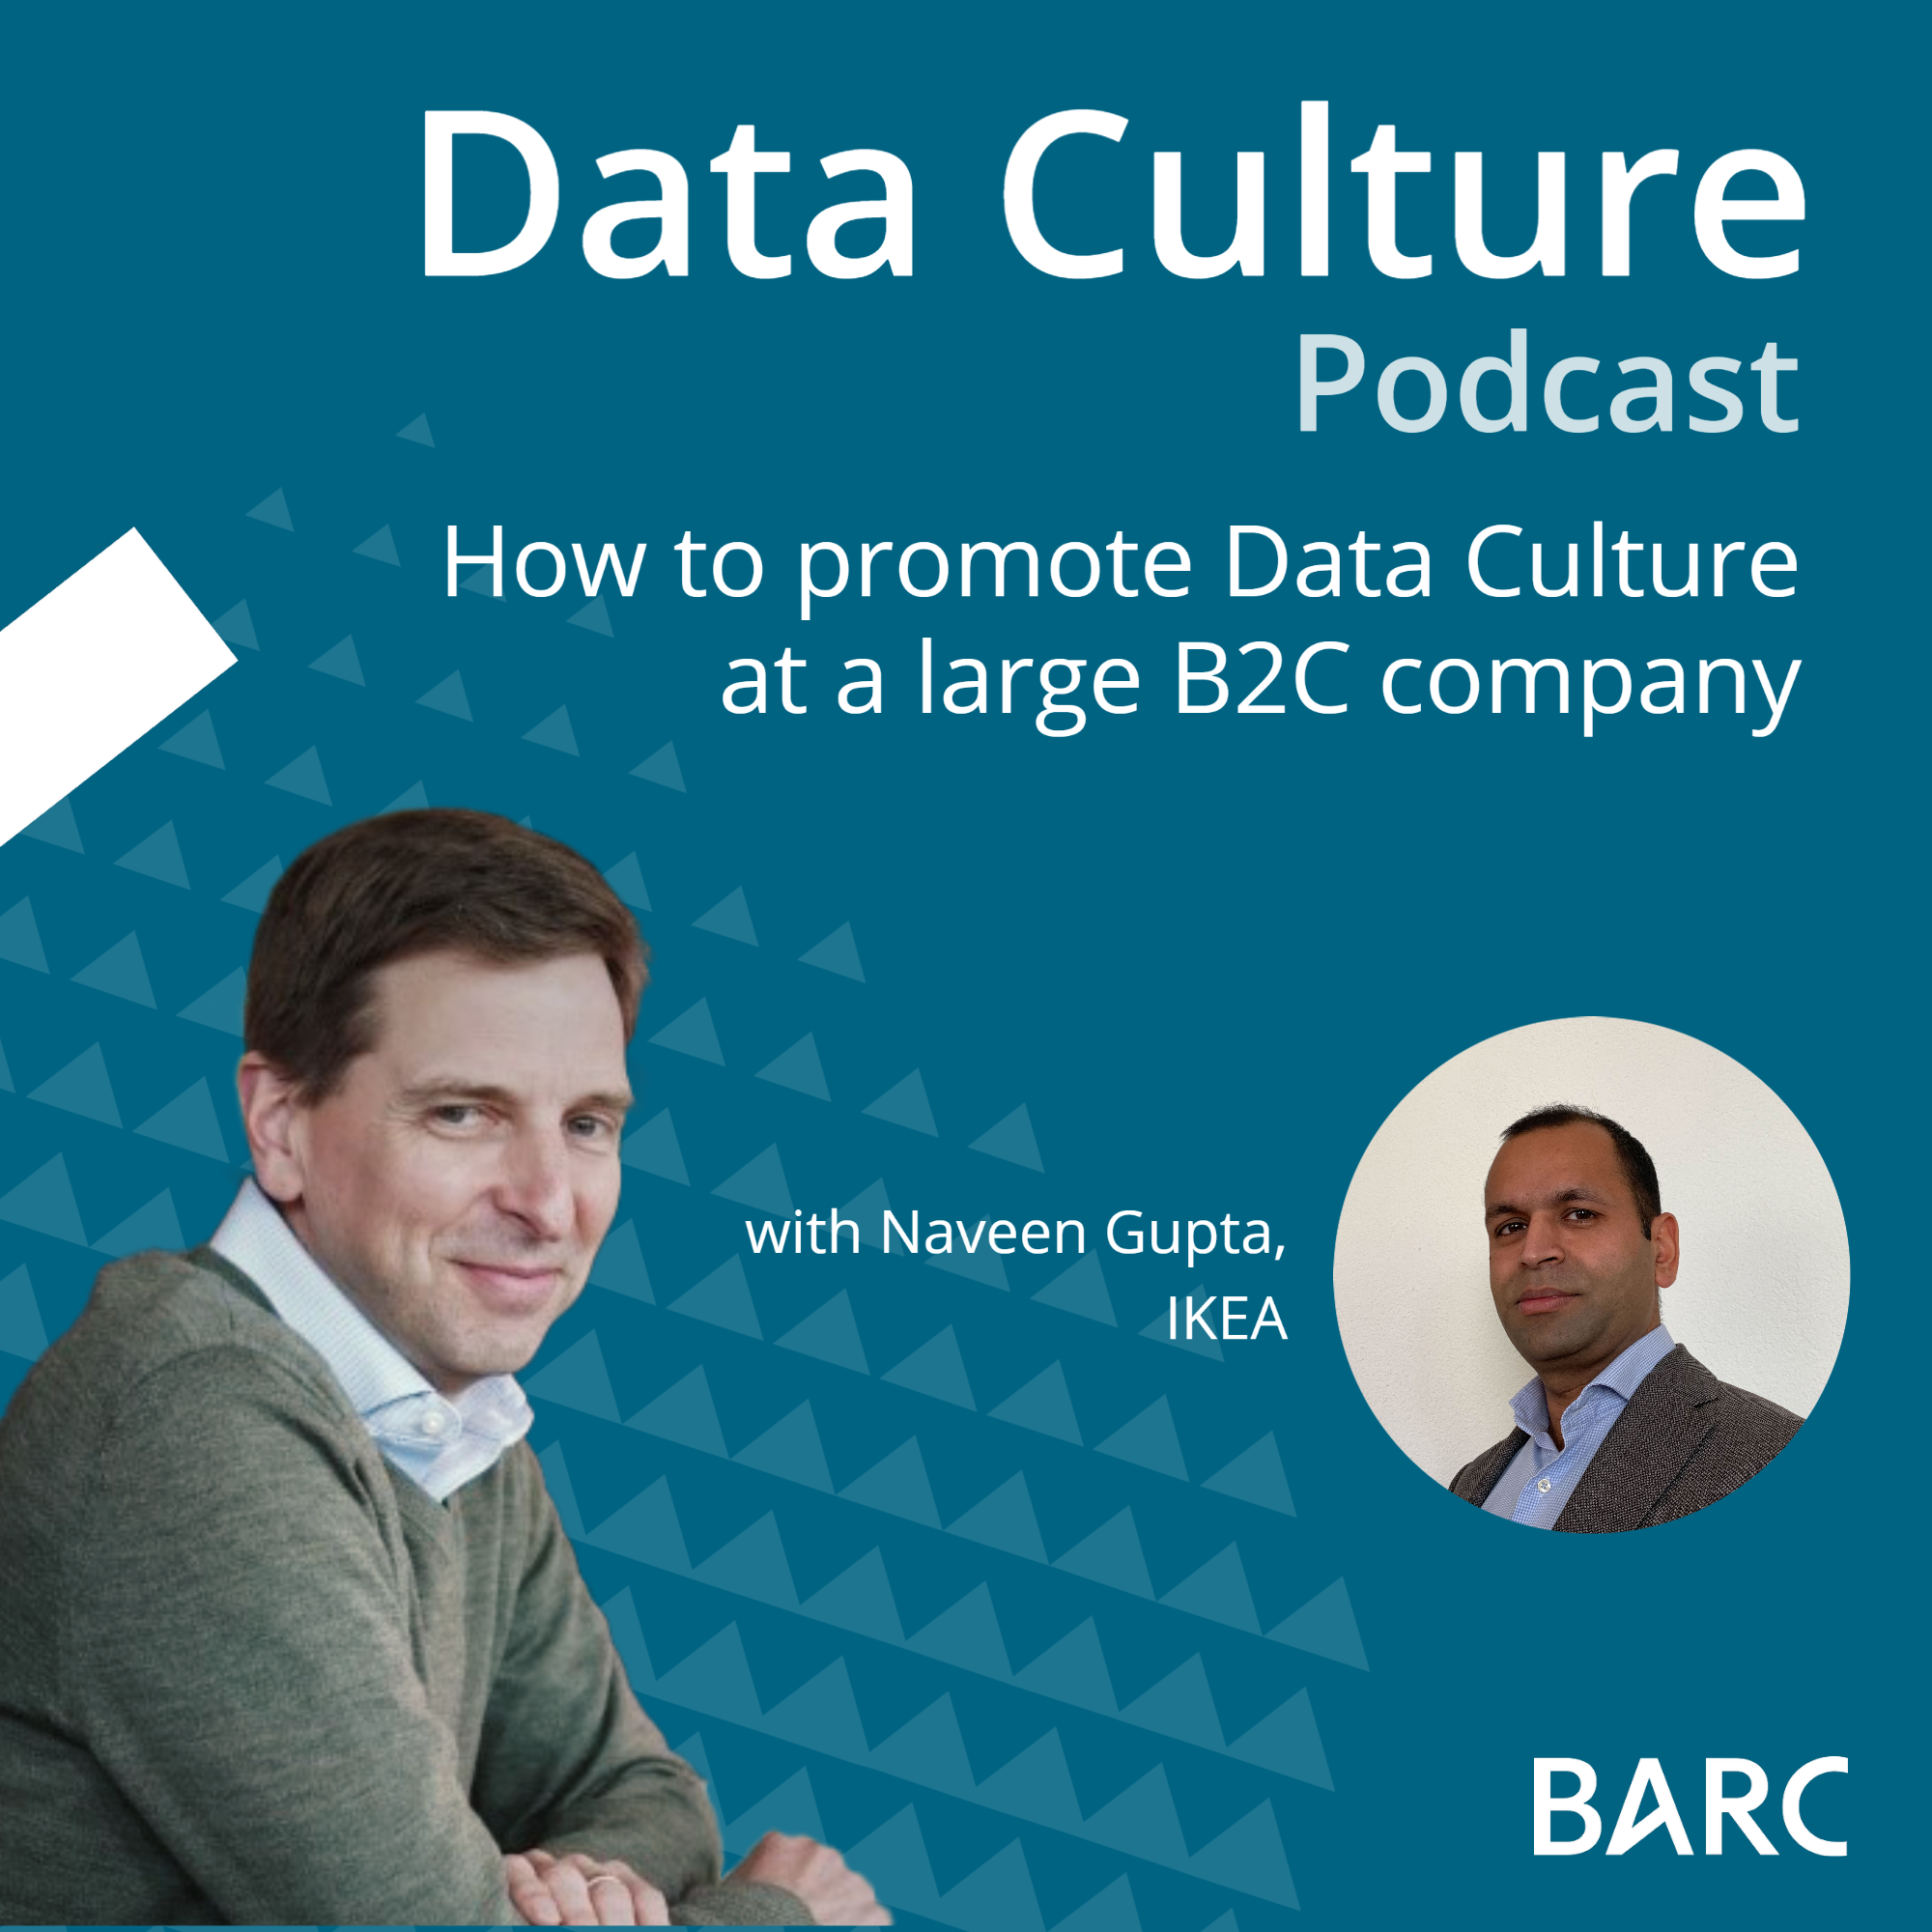 How to promote Data Culture at a large B2C company – with Naveen Gupta, IKEA